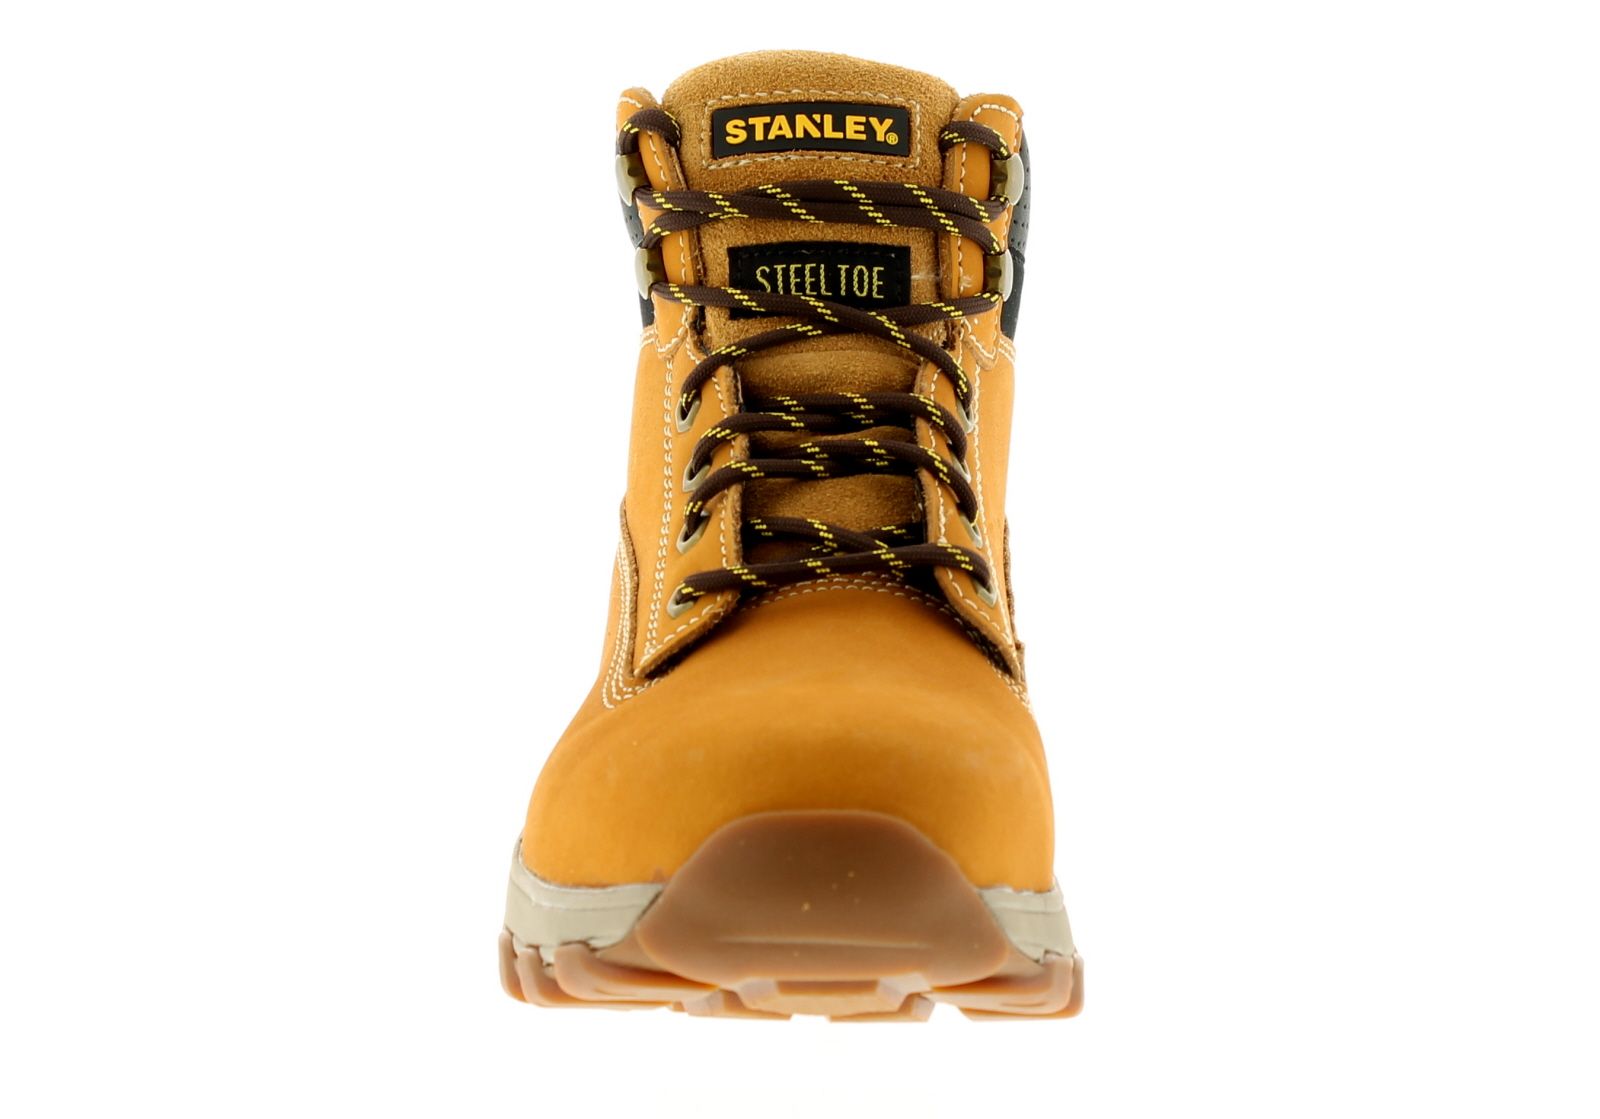 New Mens/Gents Honey Stanley Lace Up Steel Toe Cap Safety Boots. Leather Upper. Fabric Lining. Synthetic Sole. Mens Gentlemans Work Boots Diy Do It Yourself Honey Practical Safety Footwear. Additional Information: Sb Safety Standard.